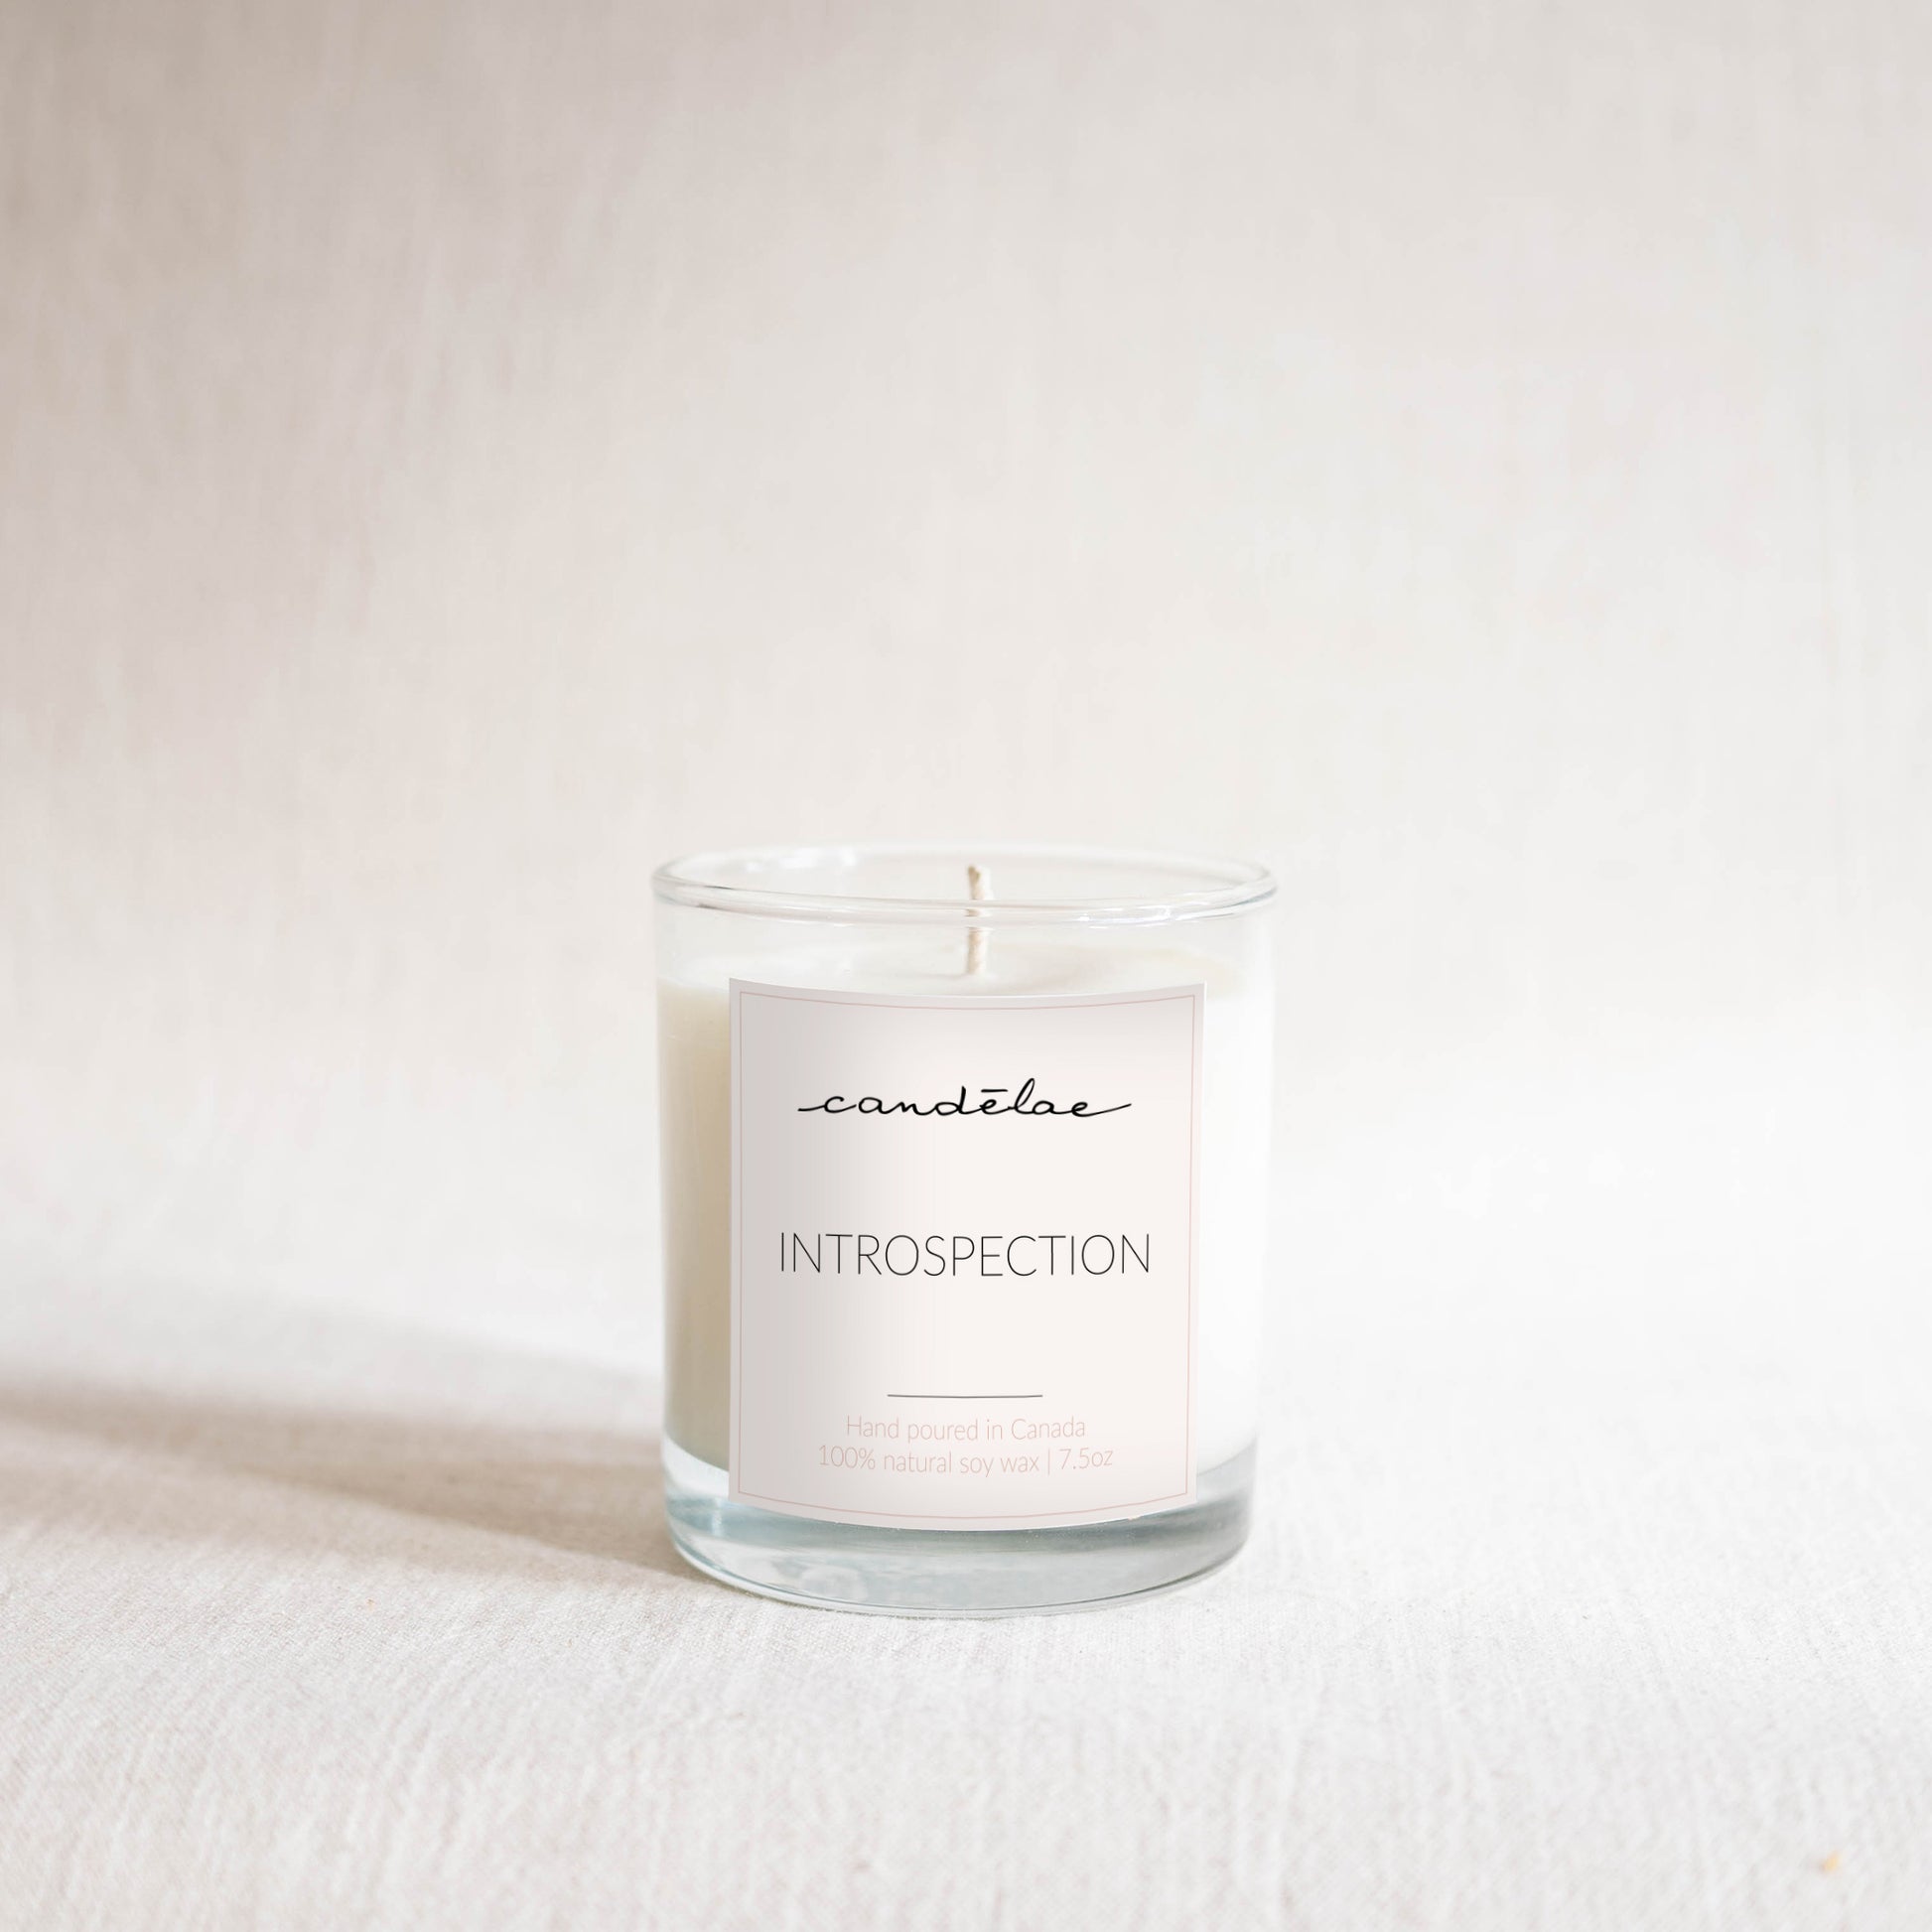 Introspection candle from candēlae is set with a white background for Photoshoot